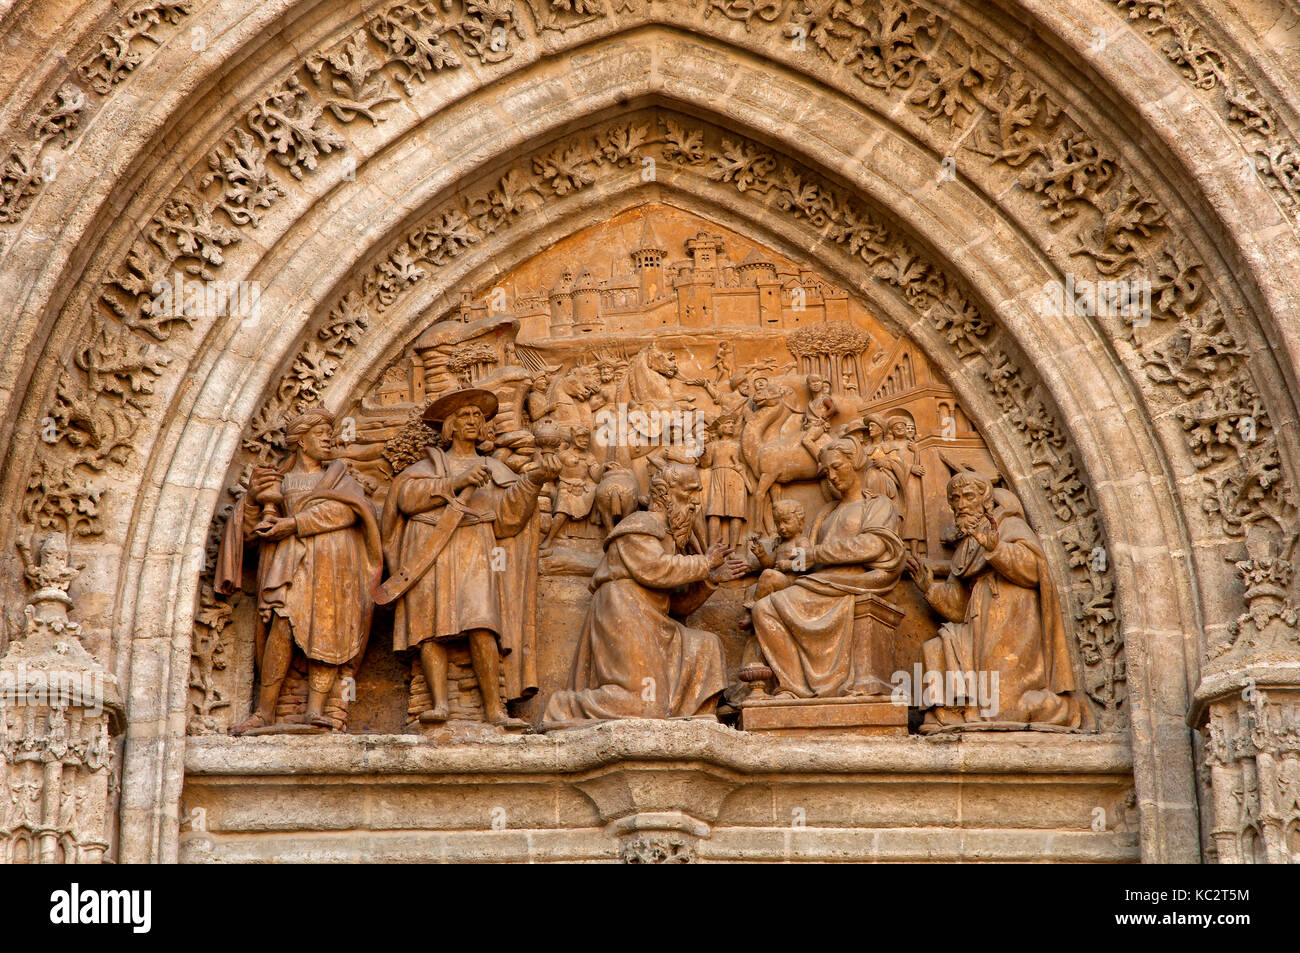 Cathedral, Tympanum of the Puerta de Palos-Adoration of the Magi, Seville, Region of Andalusia, Spain, Europe Stock Photo